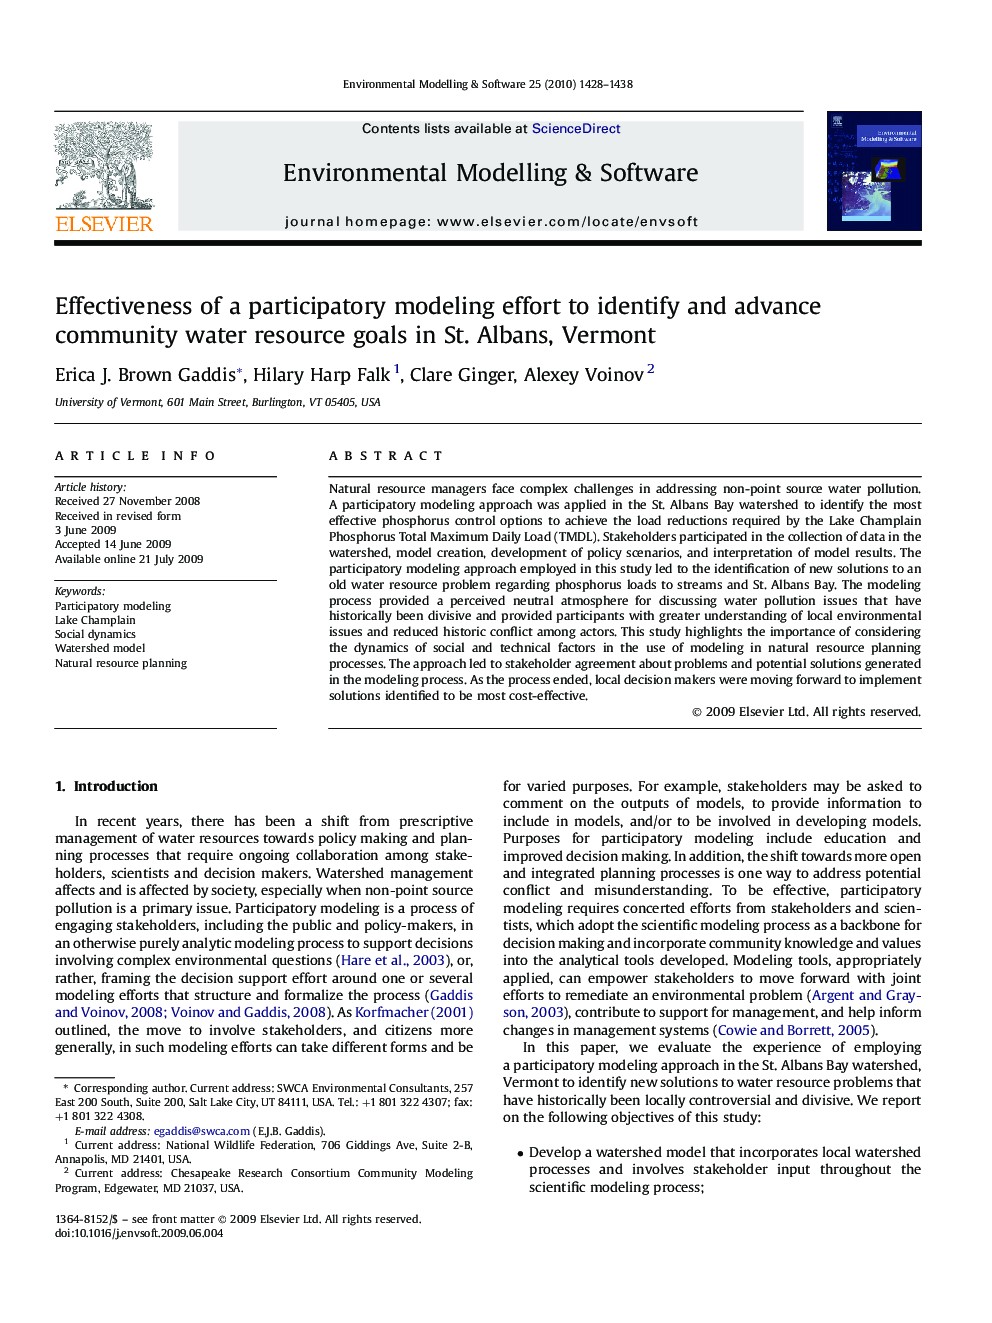 Effectiveness of a participatory modeling effort to identify and advance community water resource goals in St. Albans, Vermont